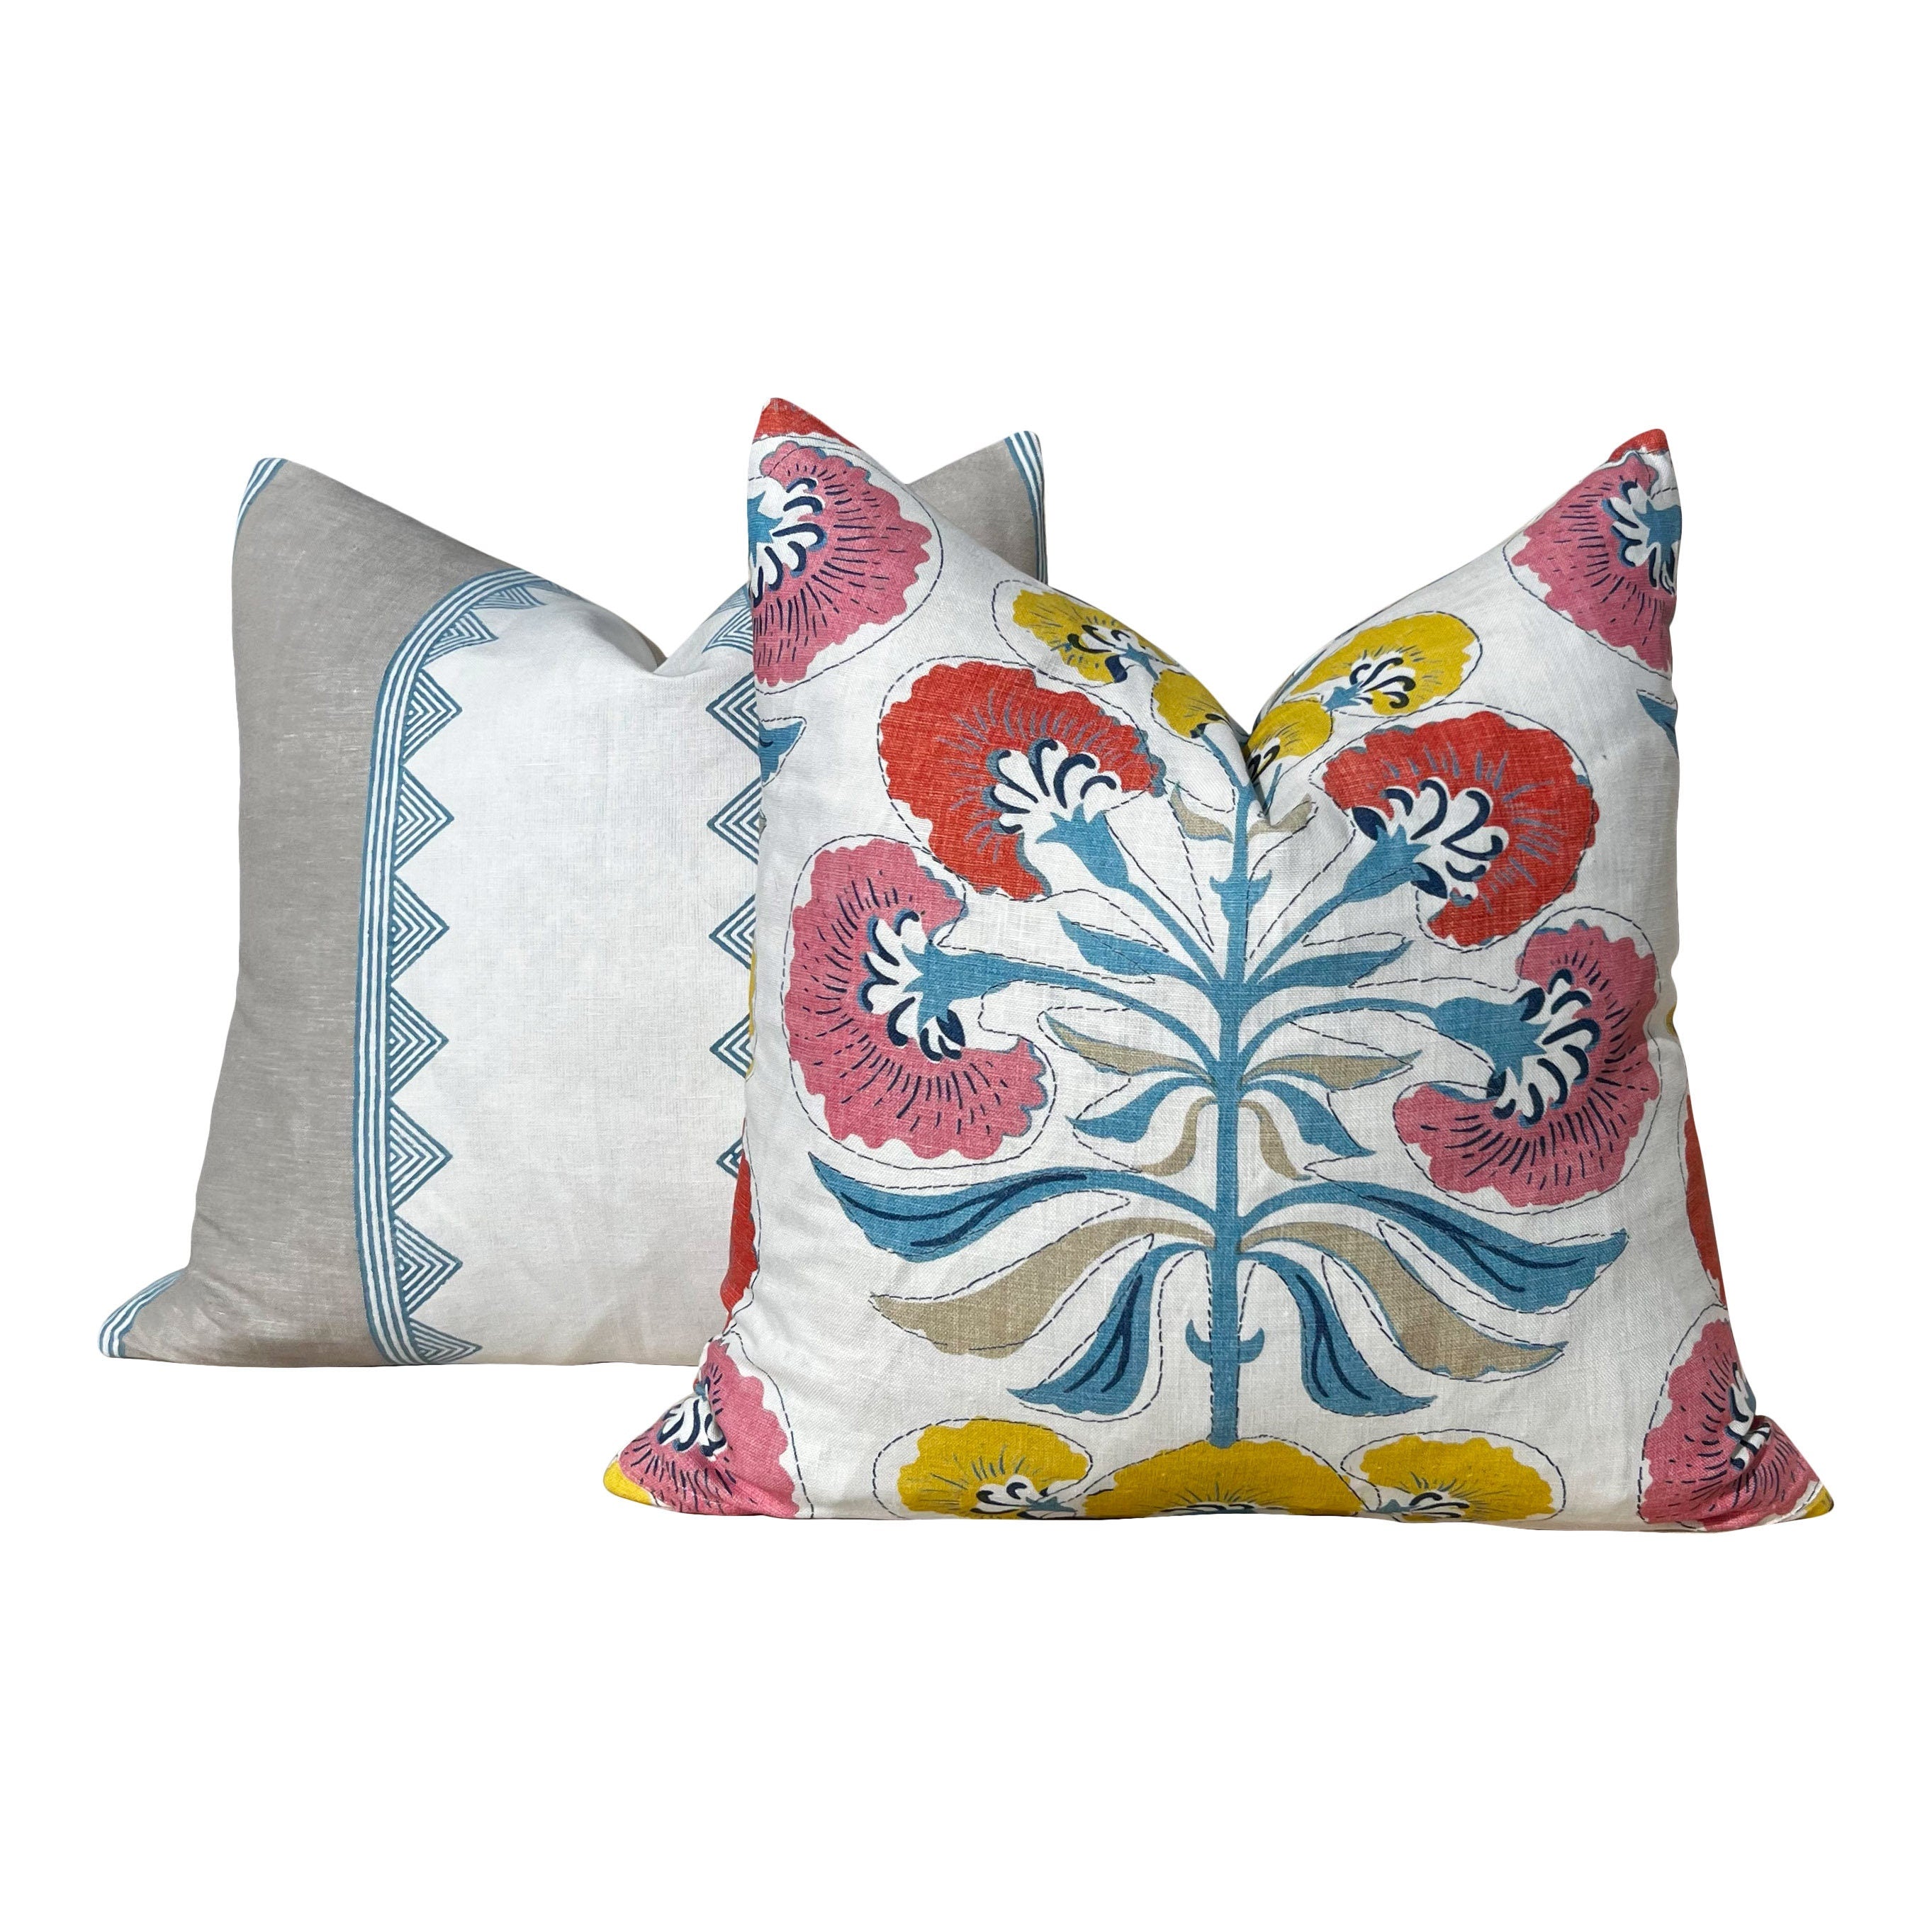 Thibaut Tybee Tree Pillow in Coral and Yellow. Designer Botanical Pillows, Euro Sham Covers 26"X26", Floral Pillow Blue Red, High End Pillow